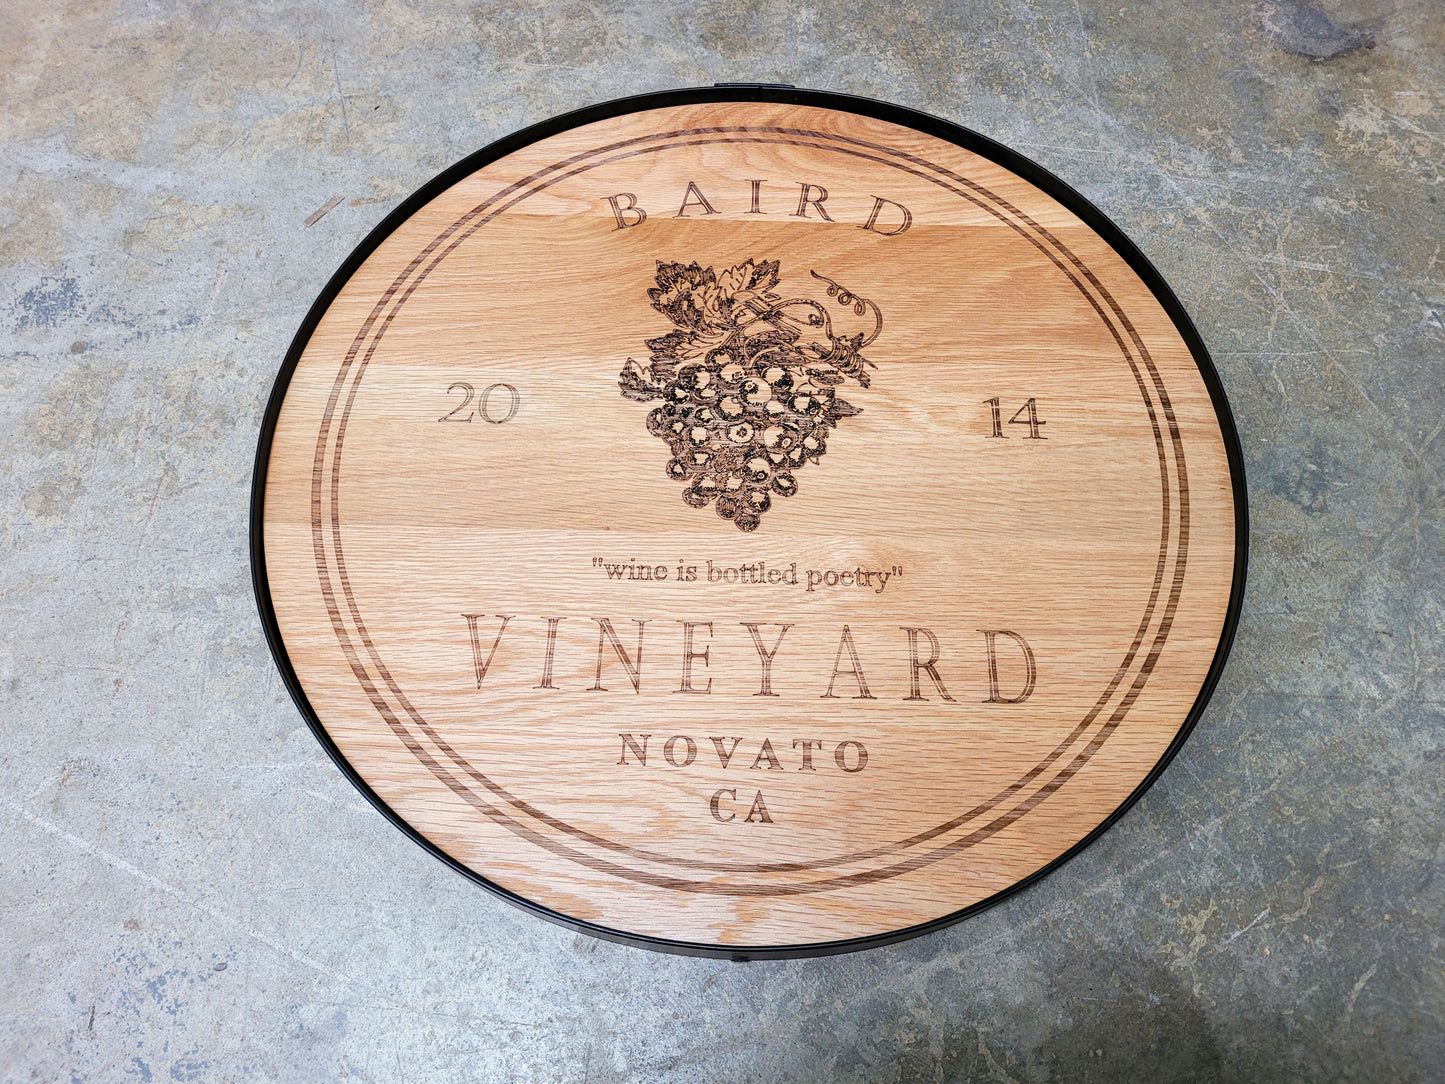 Wine Barrel Personalized Wall Art or Wedding Guestbook - Signo - made from Retired California wine barrel head with custom engraving